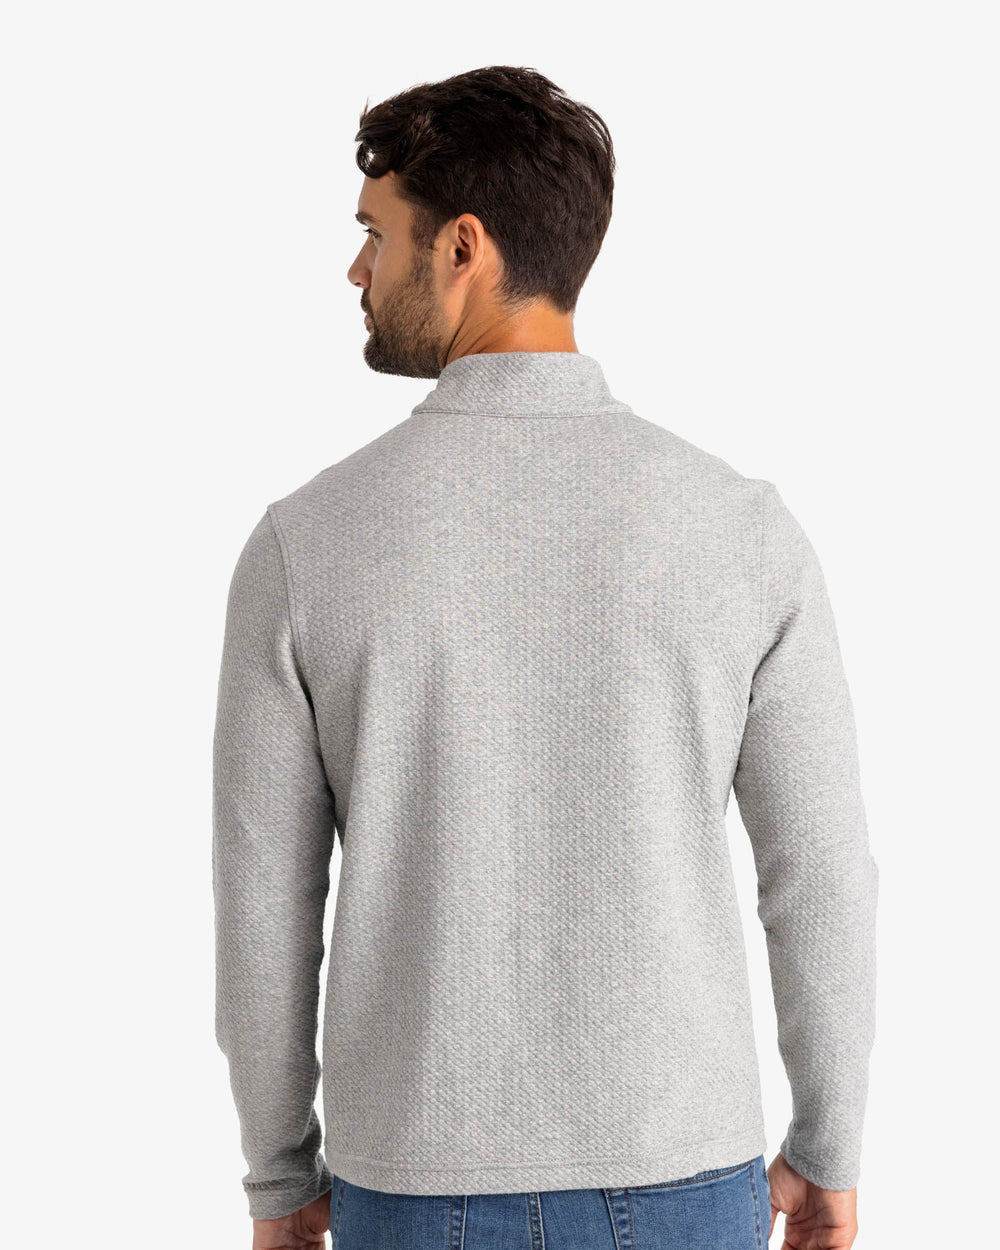 The back view of the Outbound Quarter Zip Pullover by Southern Tide - Heather Mid Grey